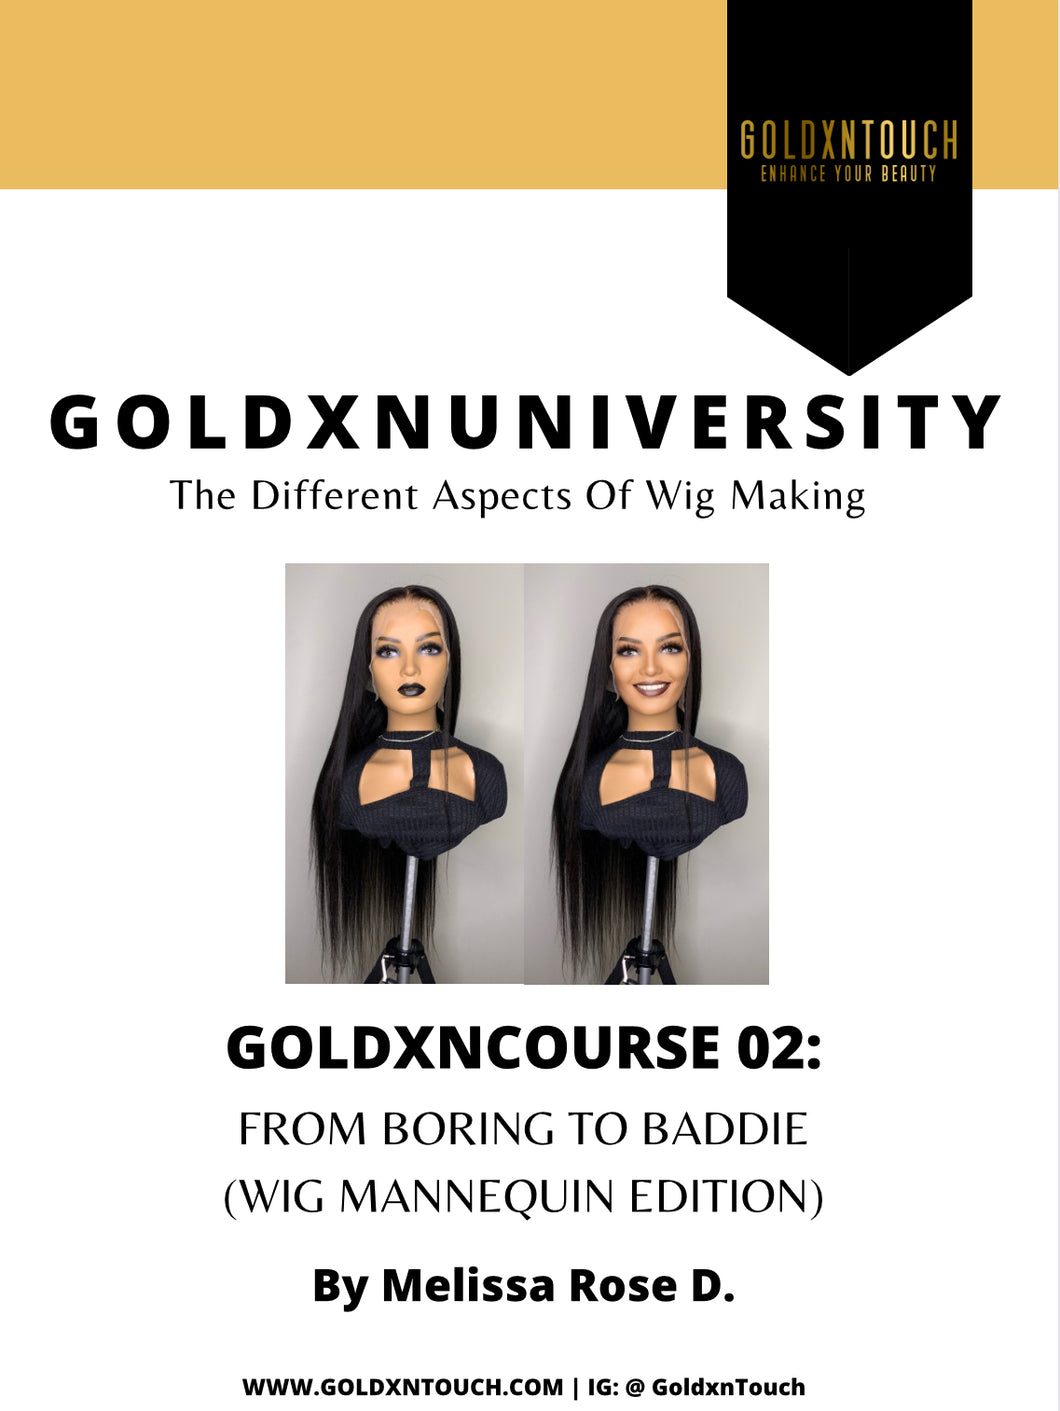 GoldxnCourse 02 : FROM BORING TO BADDIE (WIG MANNEQUIN EDITION)